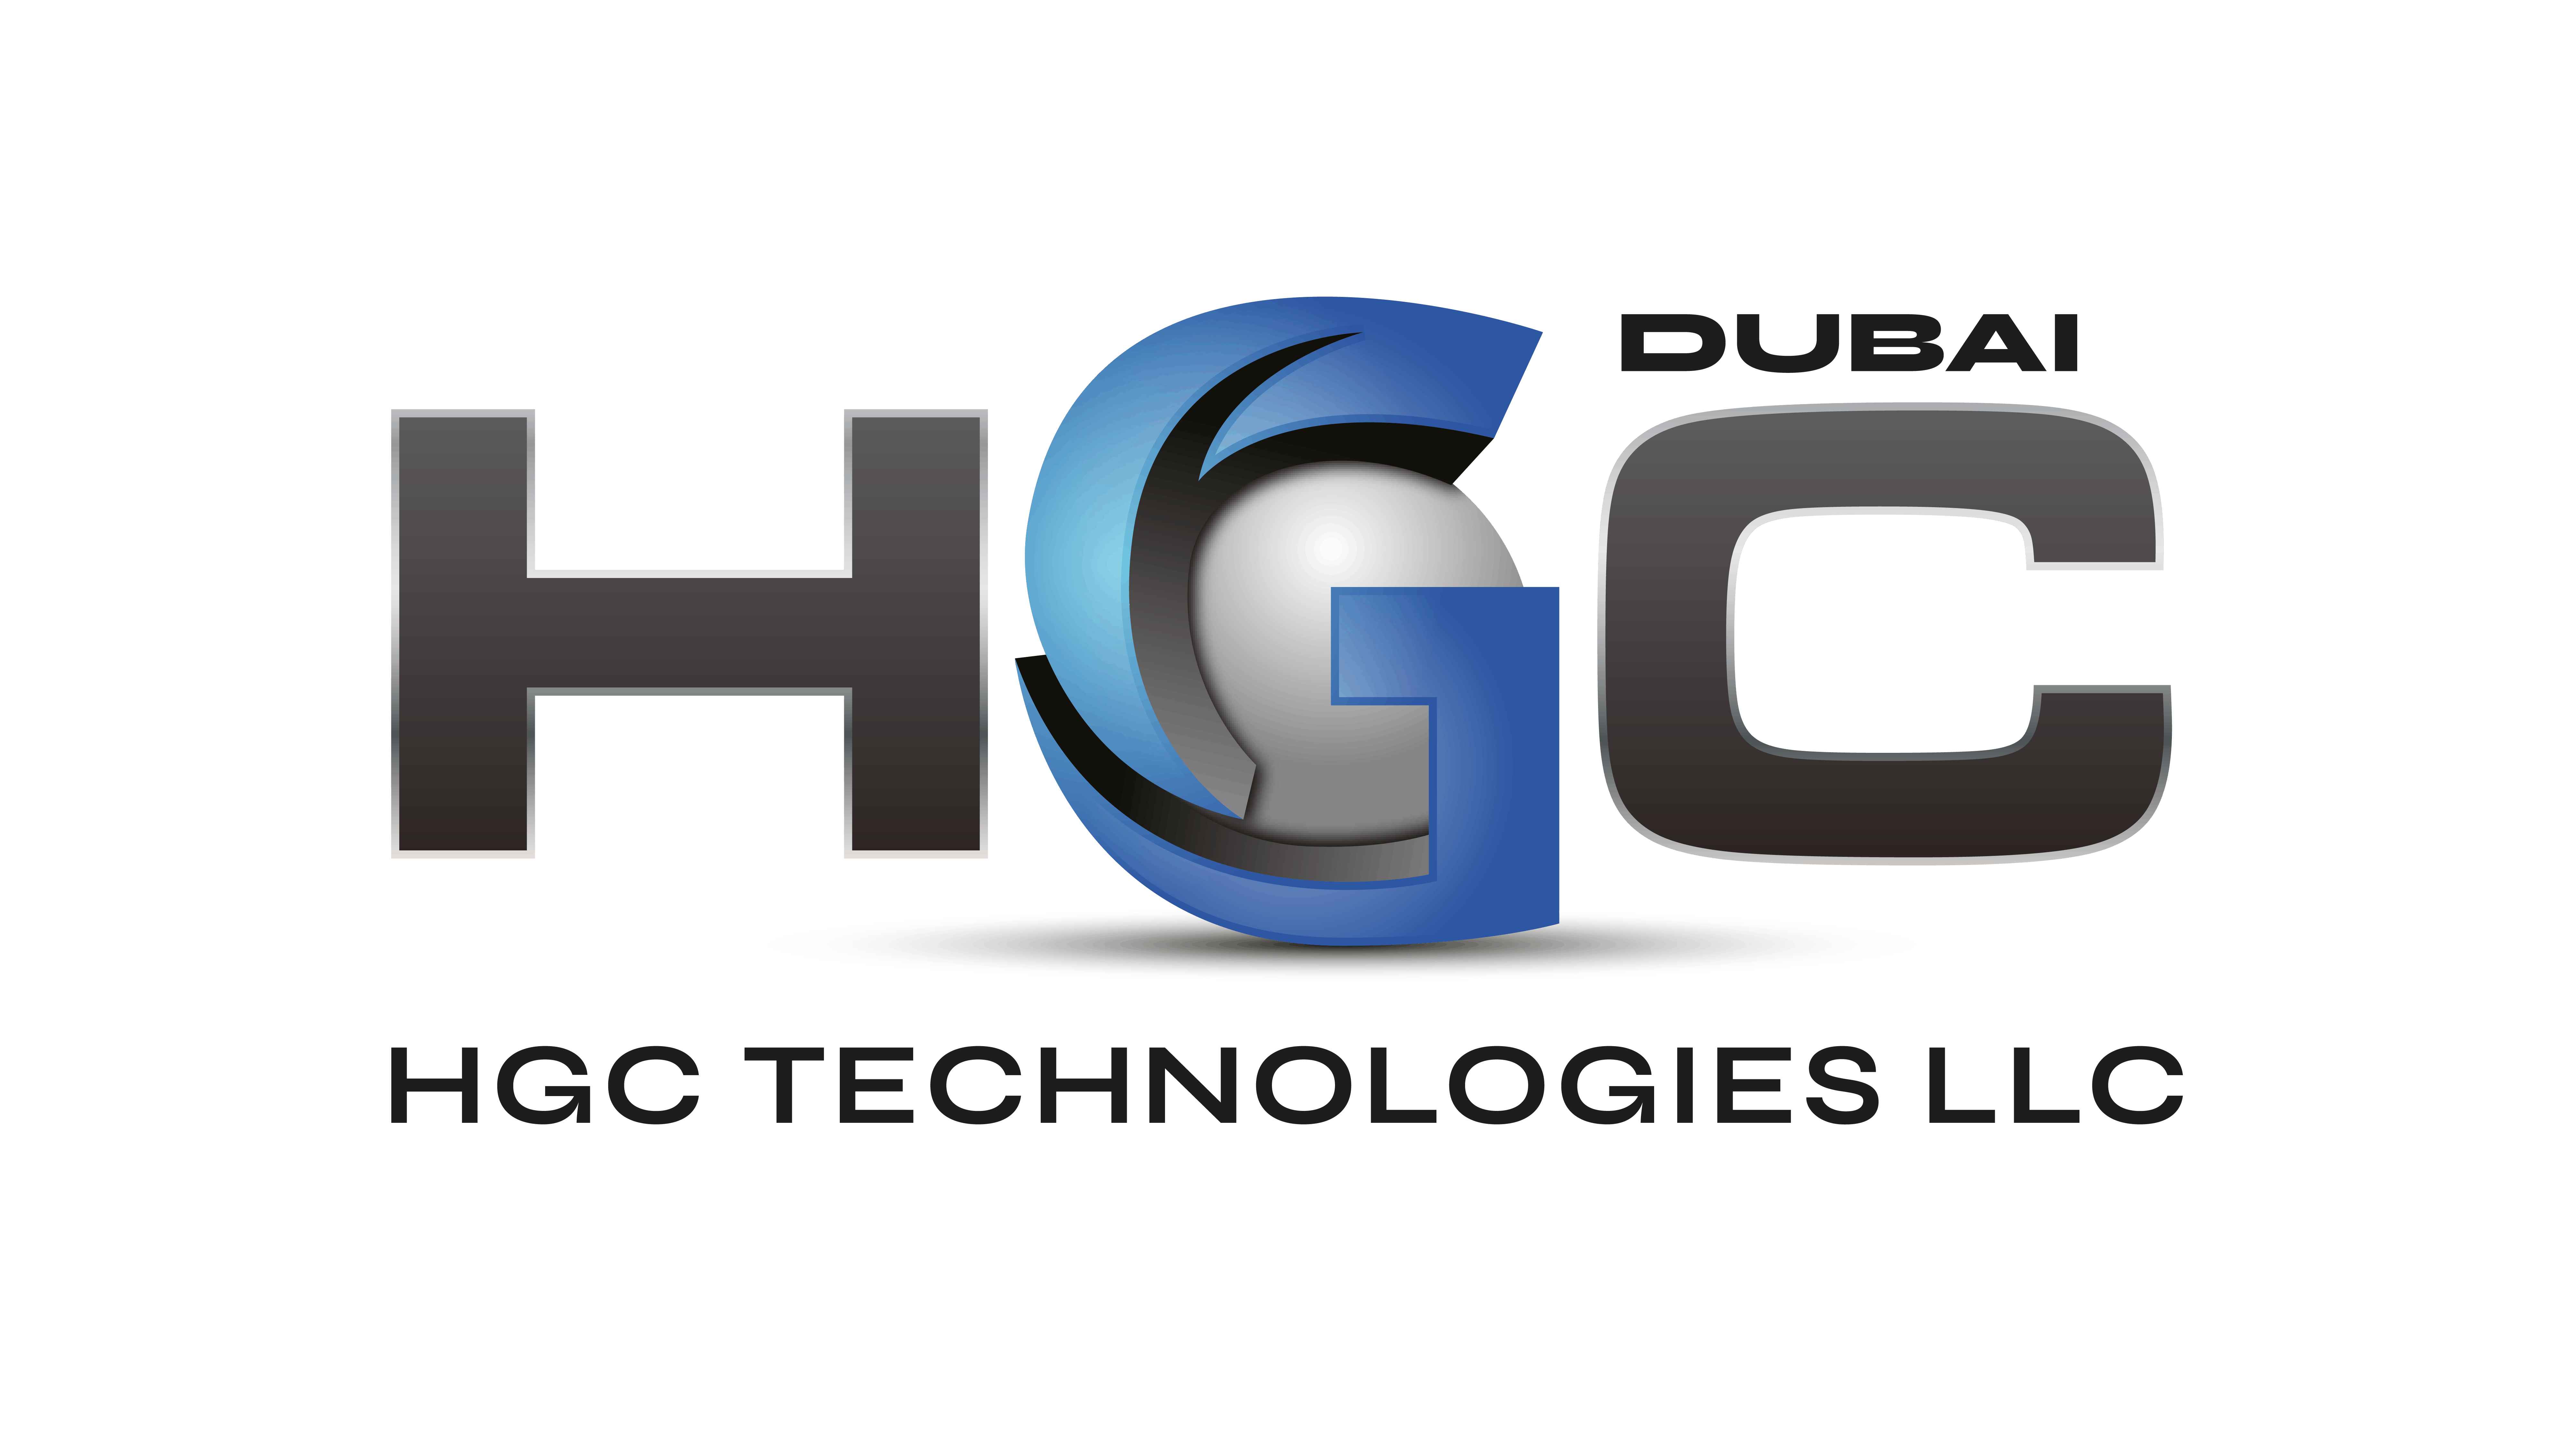 HGS - Hinduja Global Solutions Services, Contact Info | Clutch.co